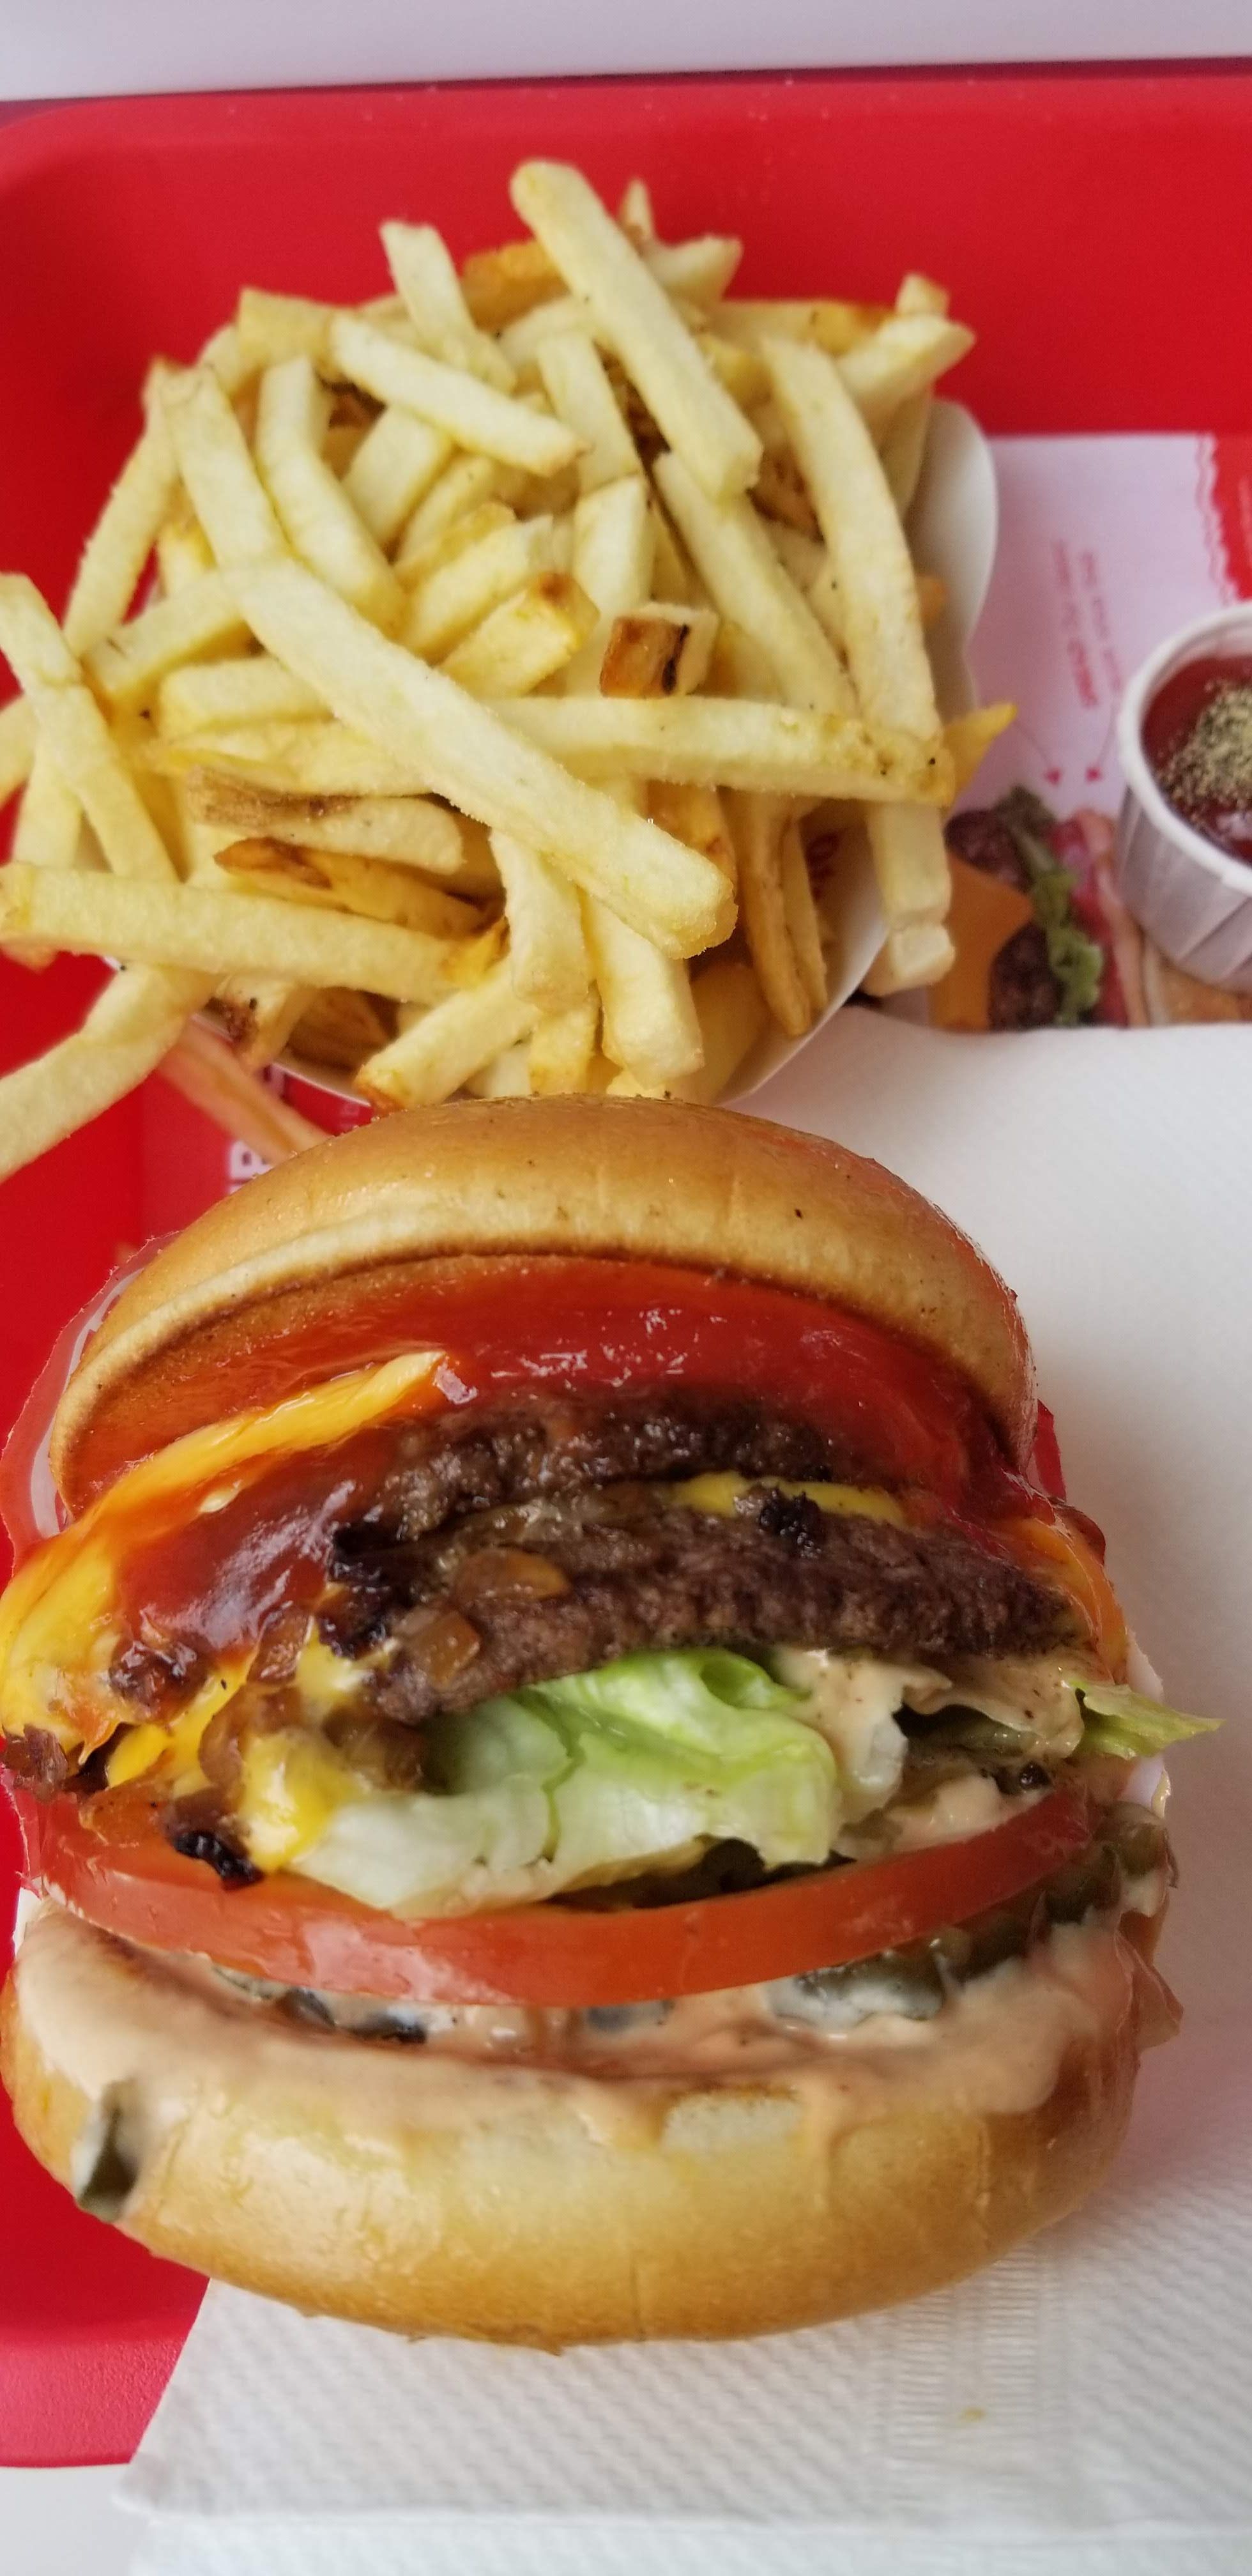 A photo of an In-N-Out burger.